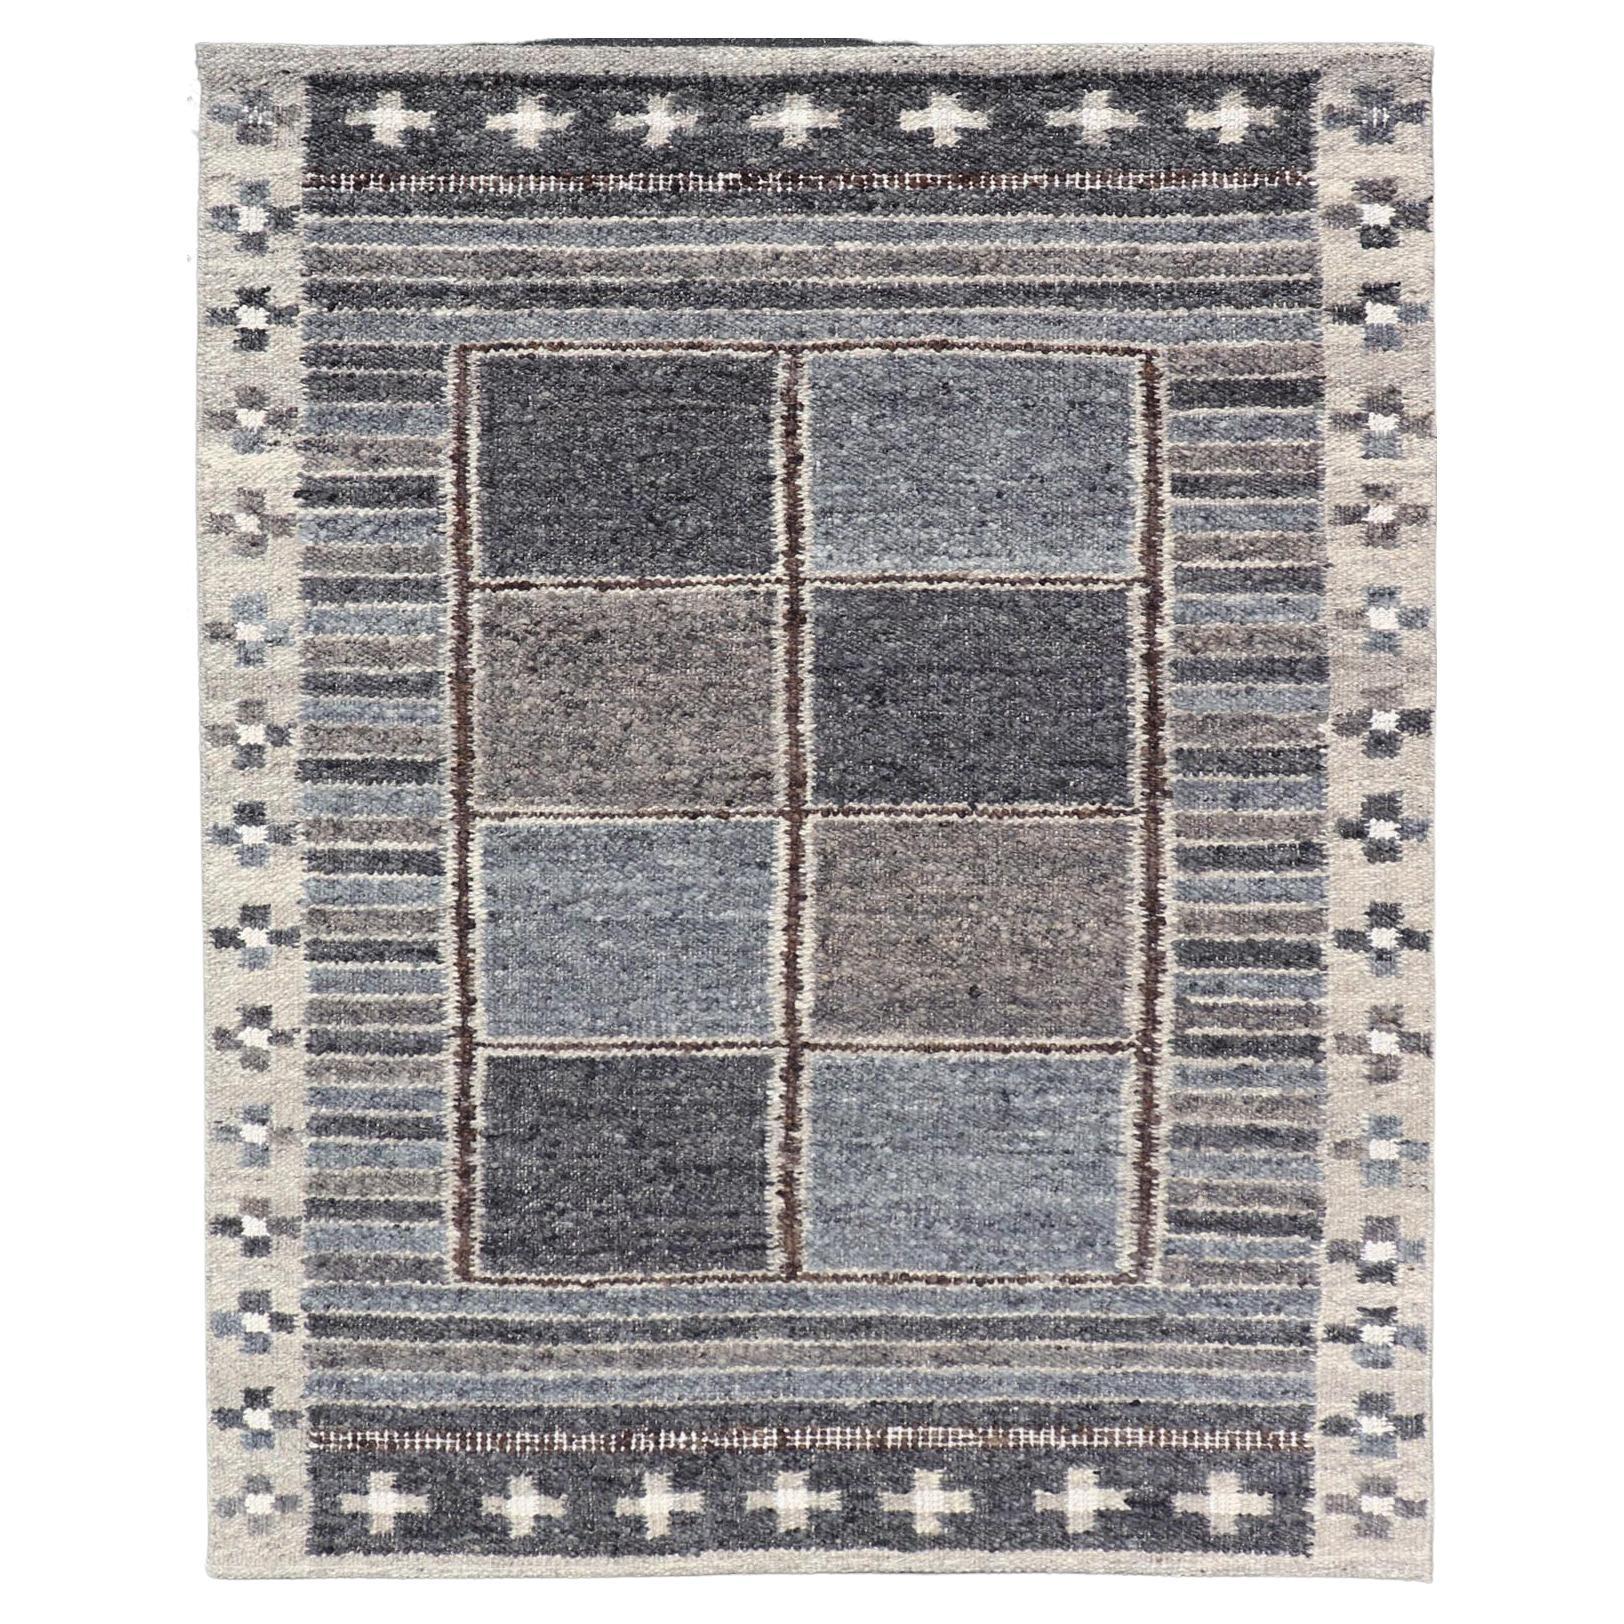 Modern Scandinavian/Swedish Design Rug in Blue, Charcoal, Gray and Cream For Sale